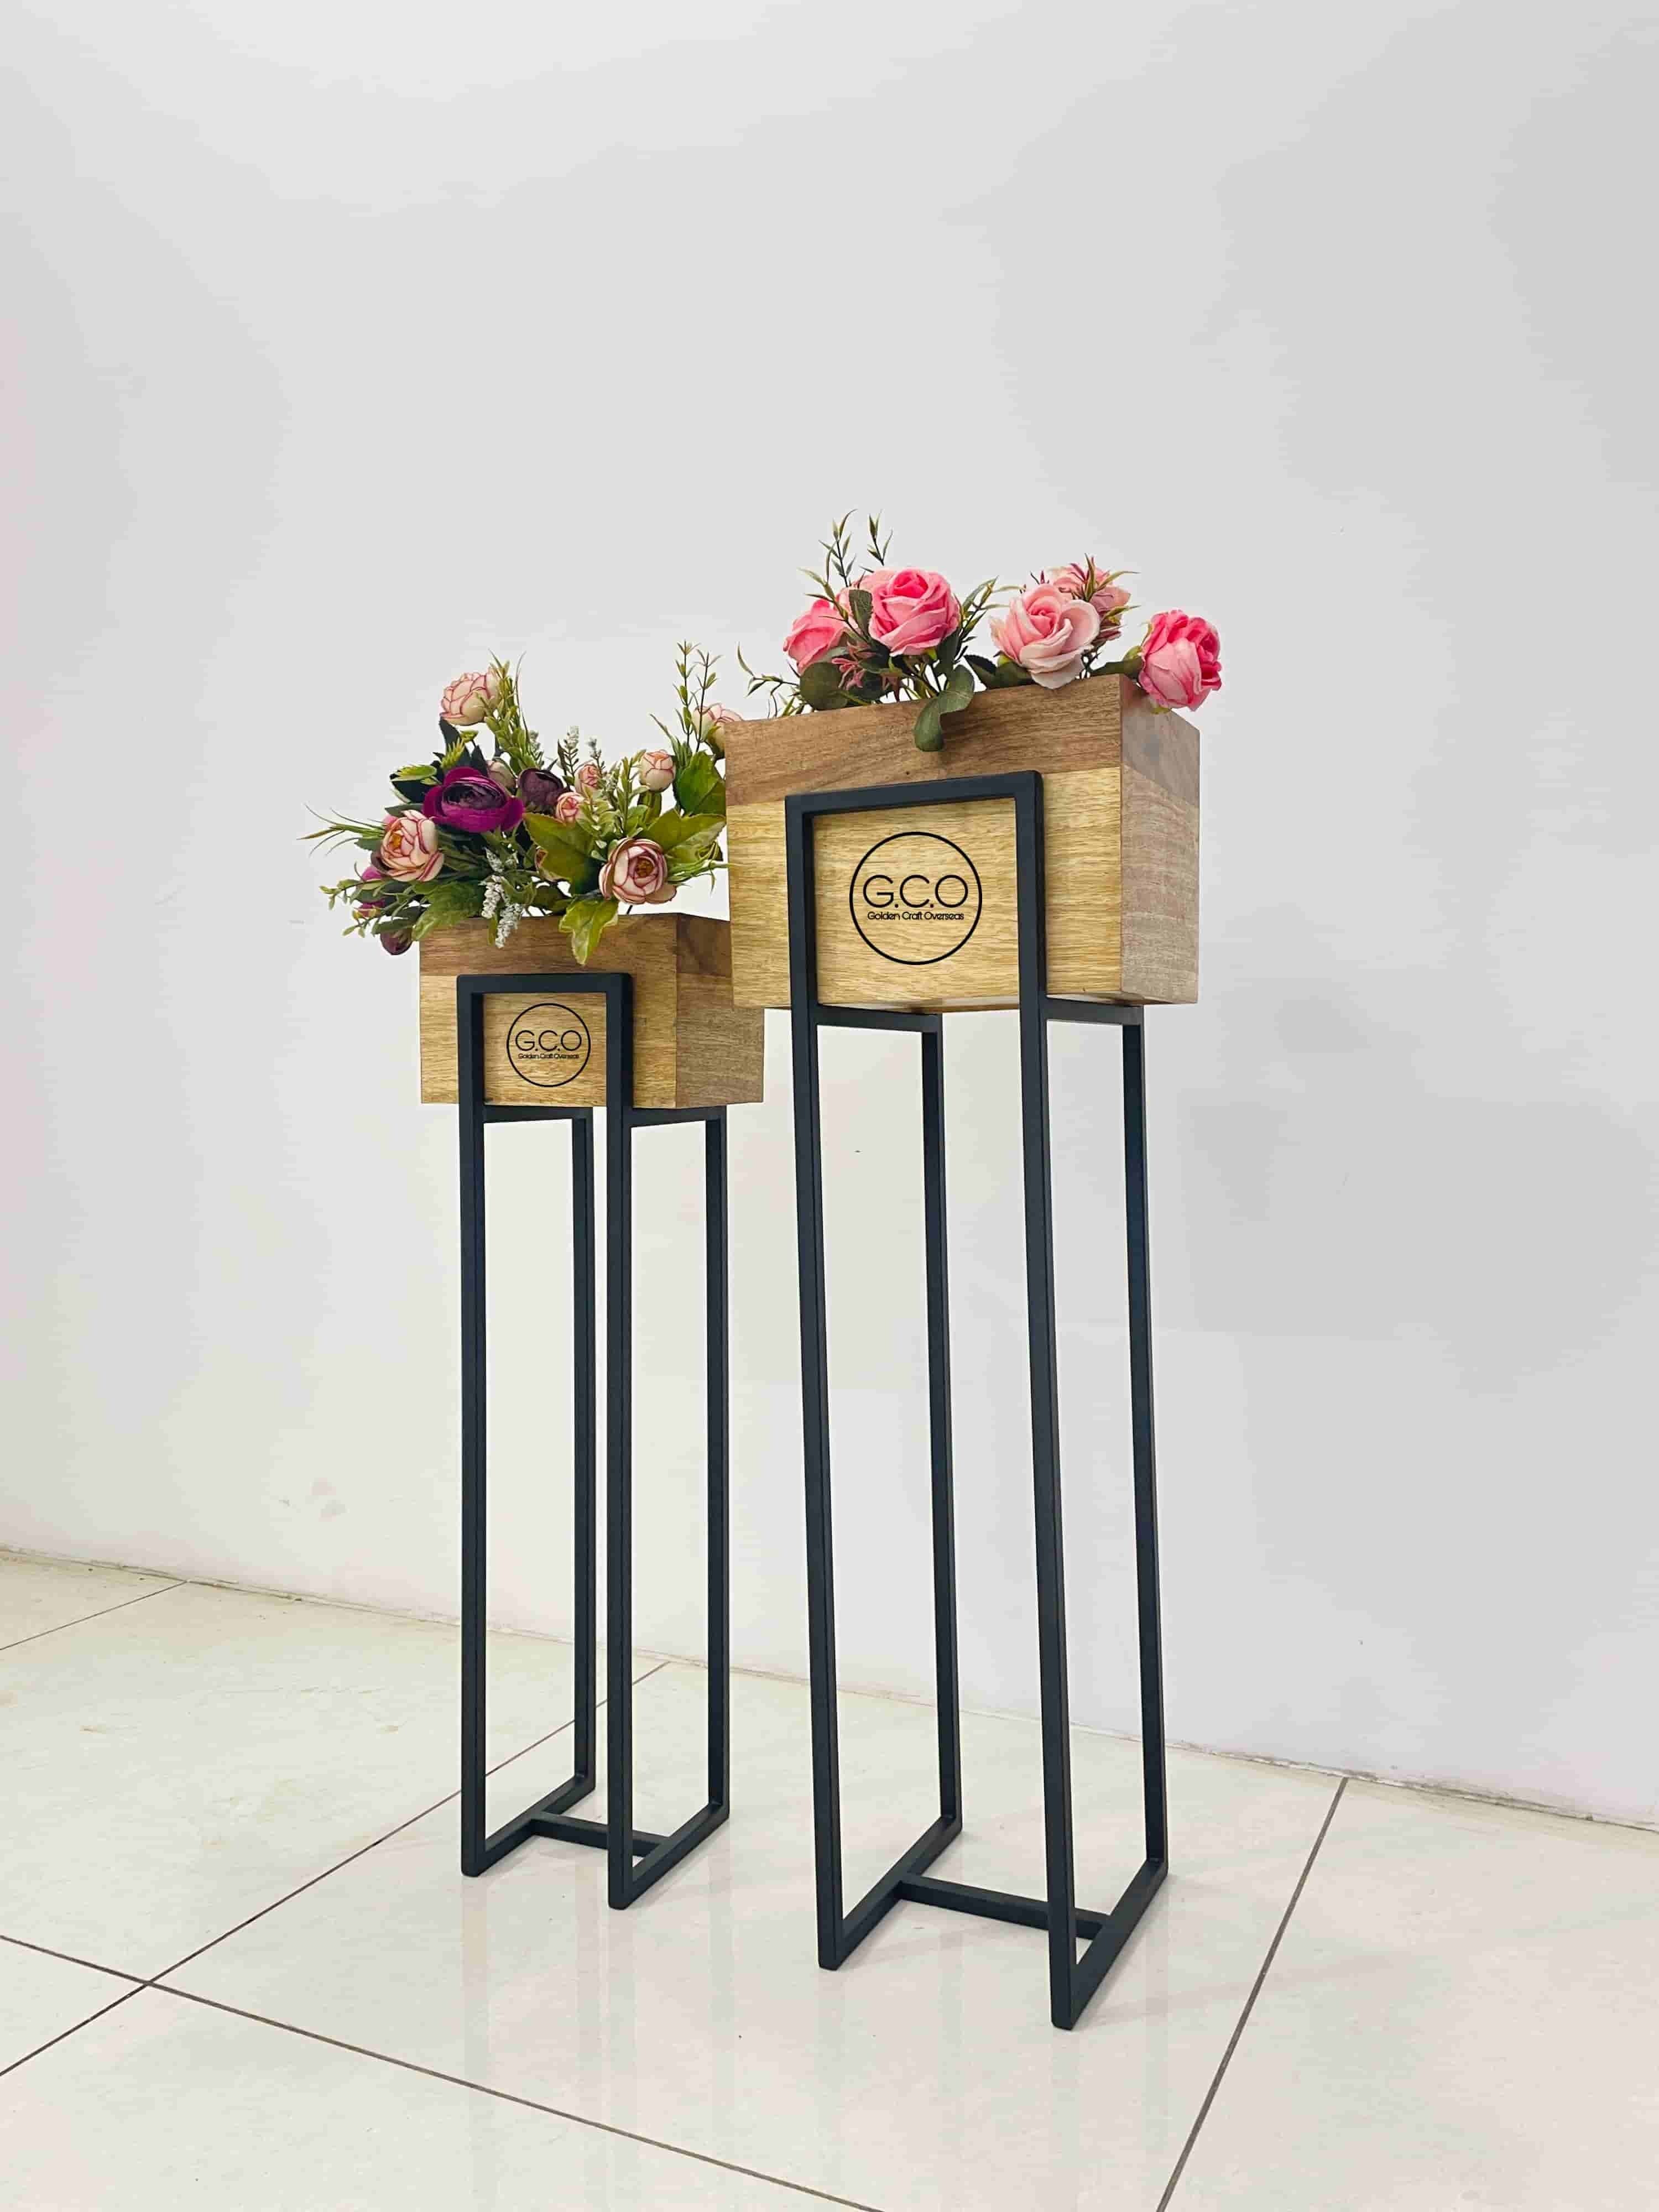 Wooden Planter set of 2 with iron stands powder coated finish for garden decorations